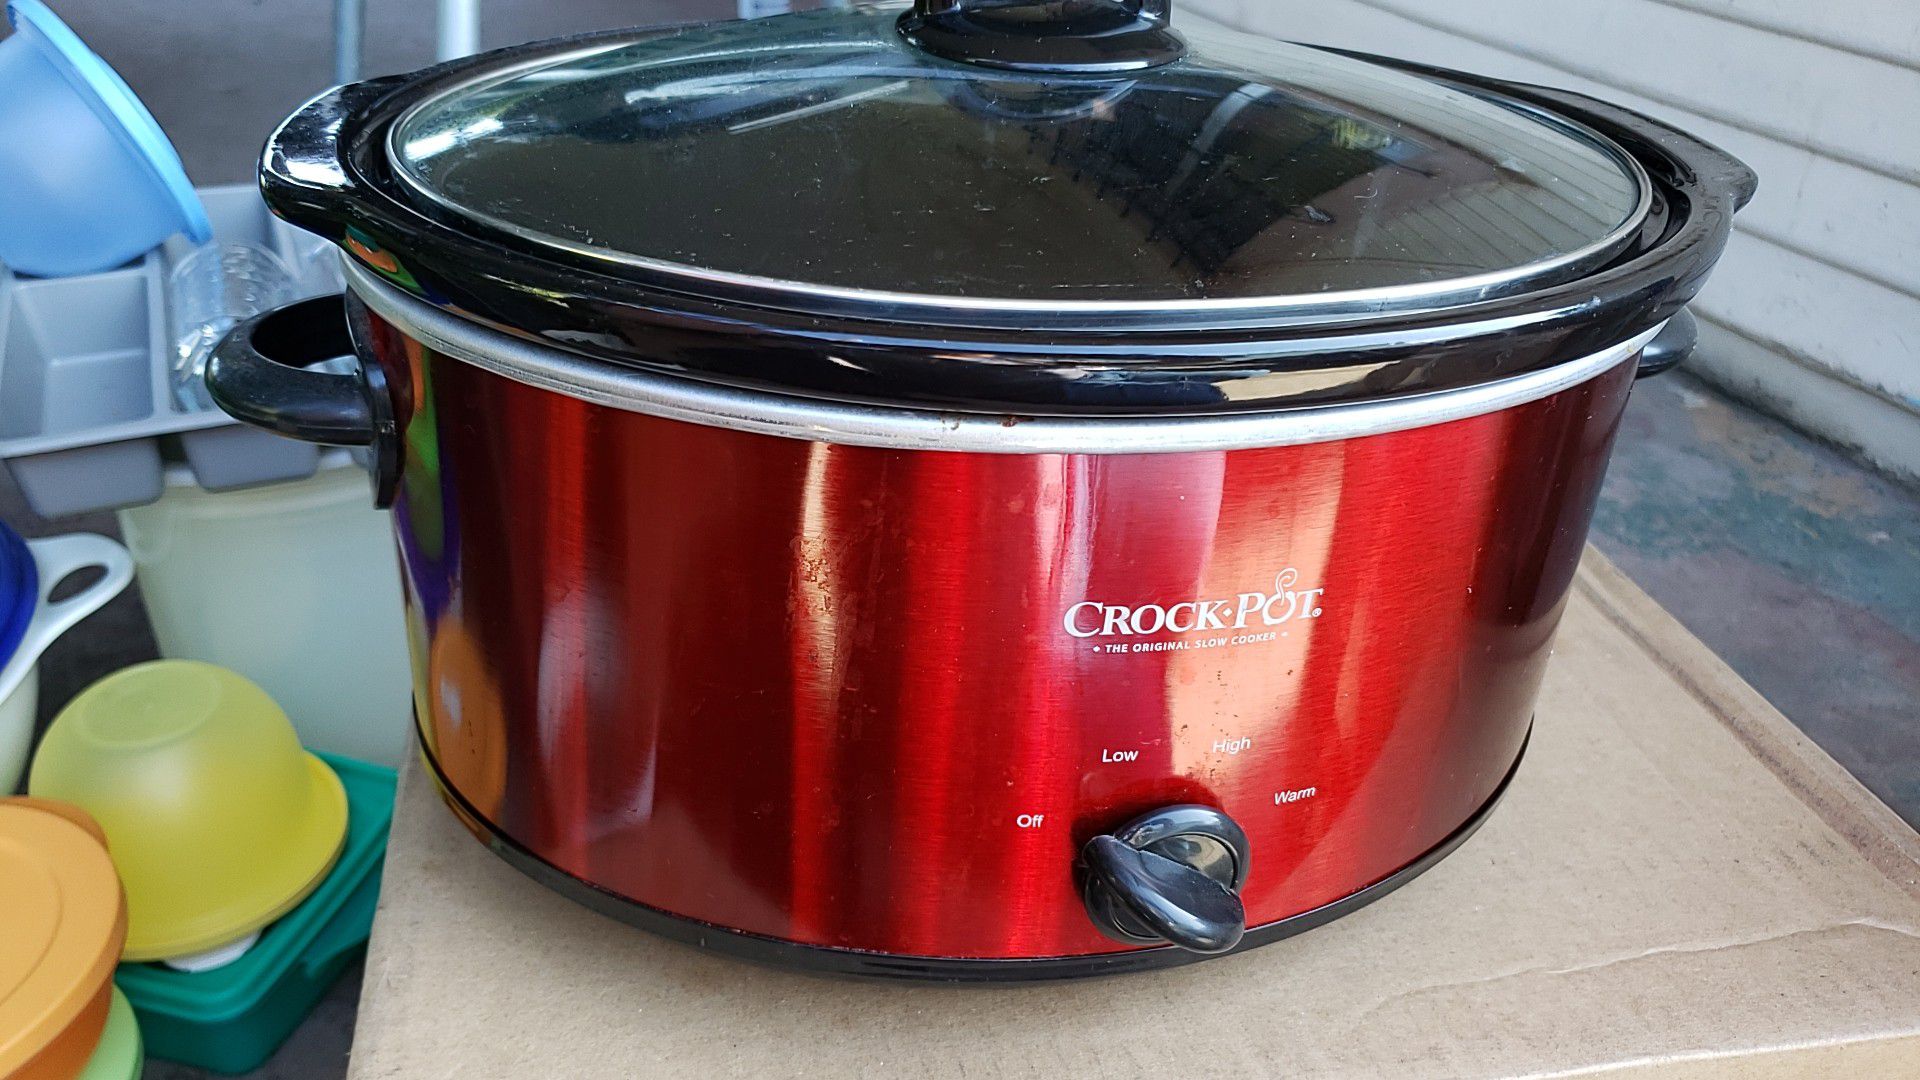 Crock pot.. used.. but works great